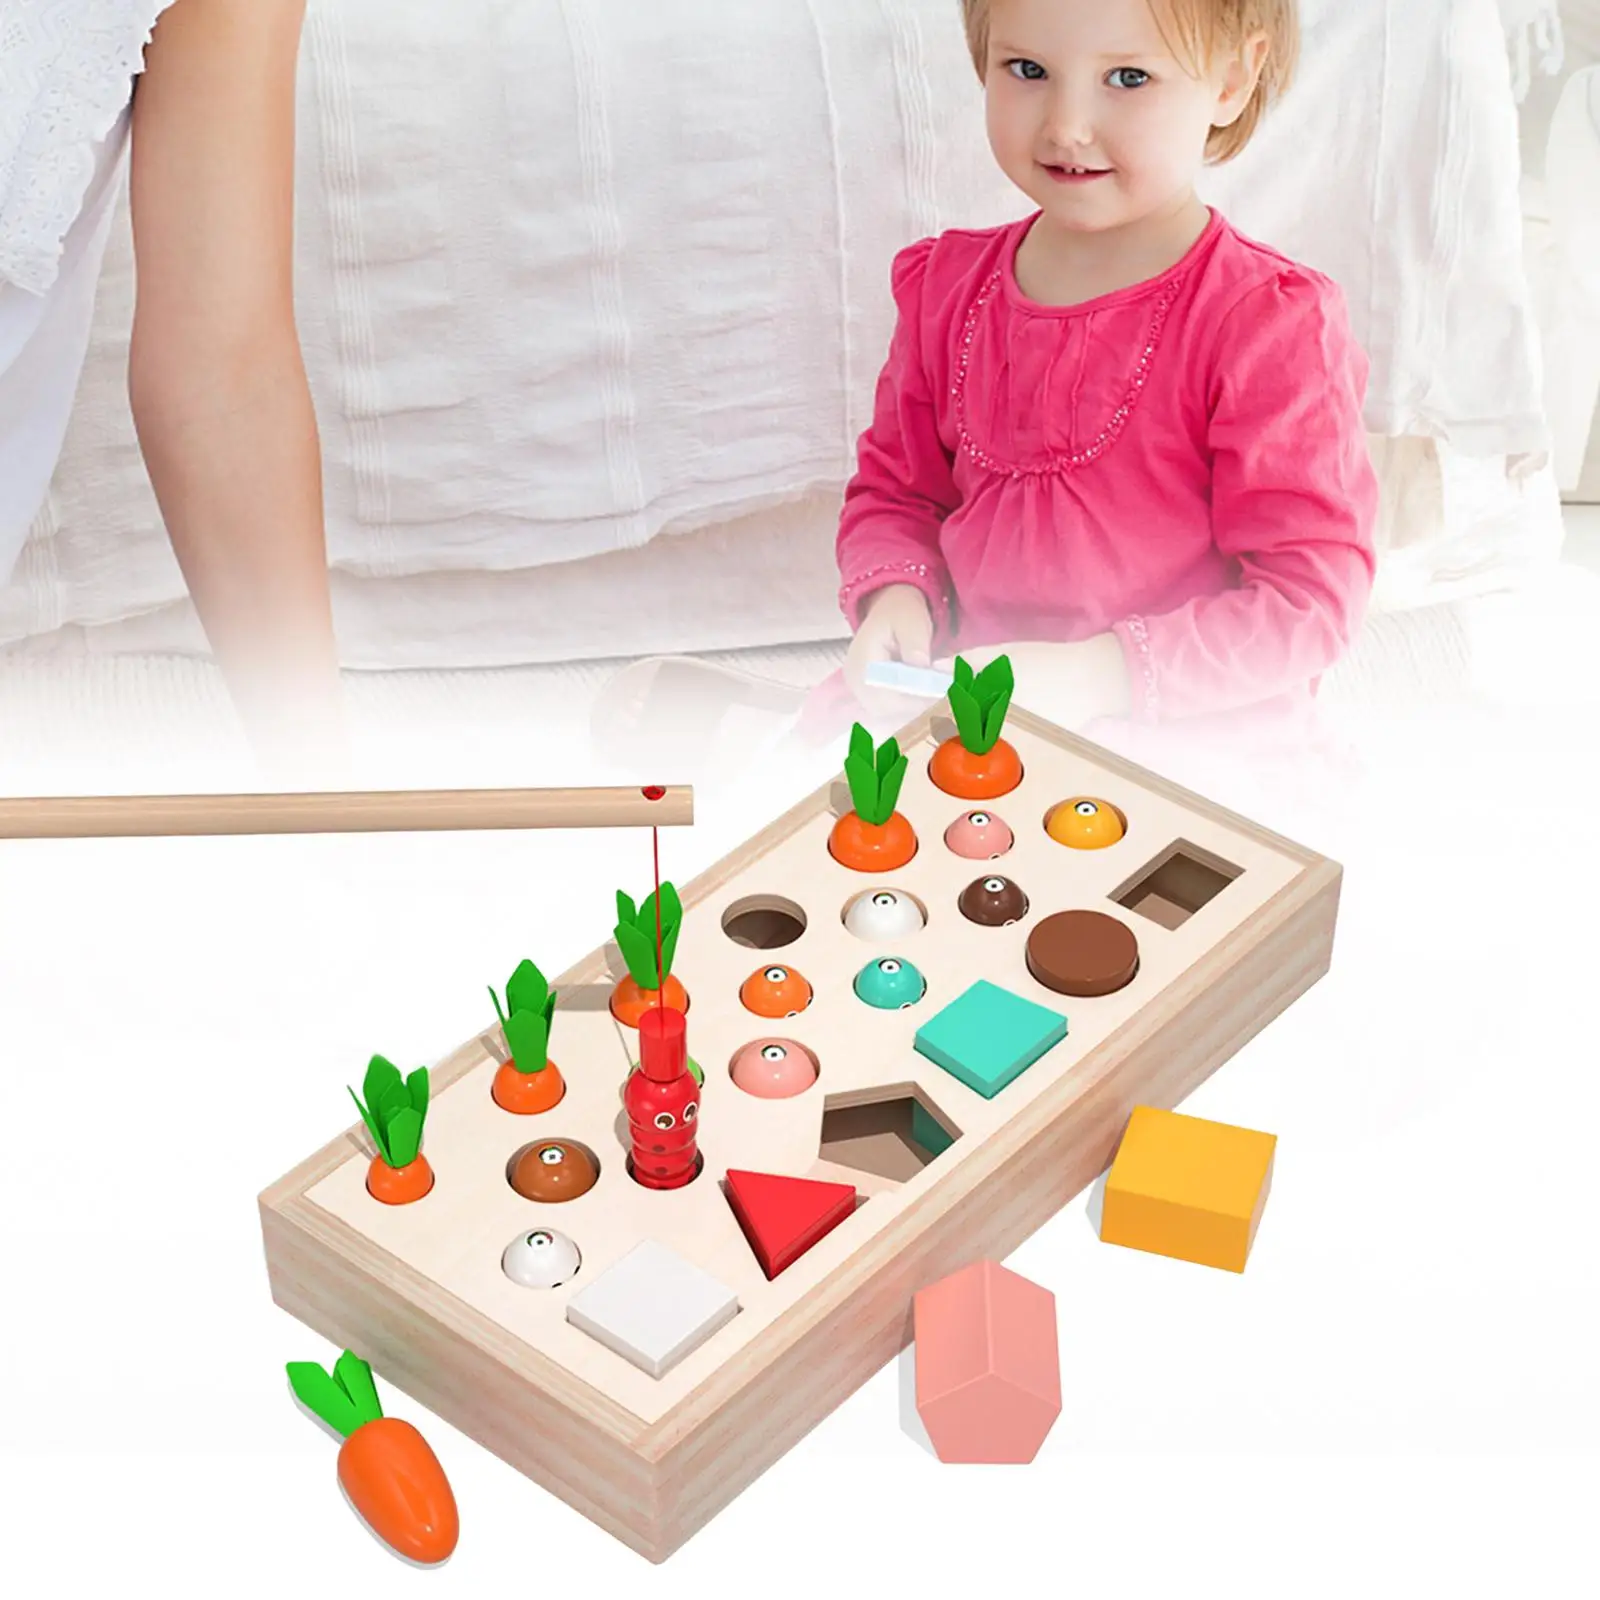 Baby Montessori Wooden Toys, Early Educational Toys Sorting Matching Game for Kids 1 2 3 4 5 6 Boys Girls Toddler Birthday Gifts